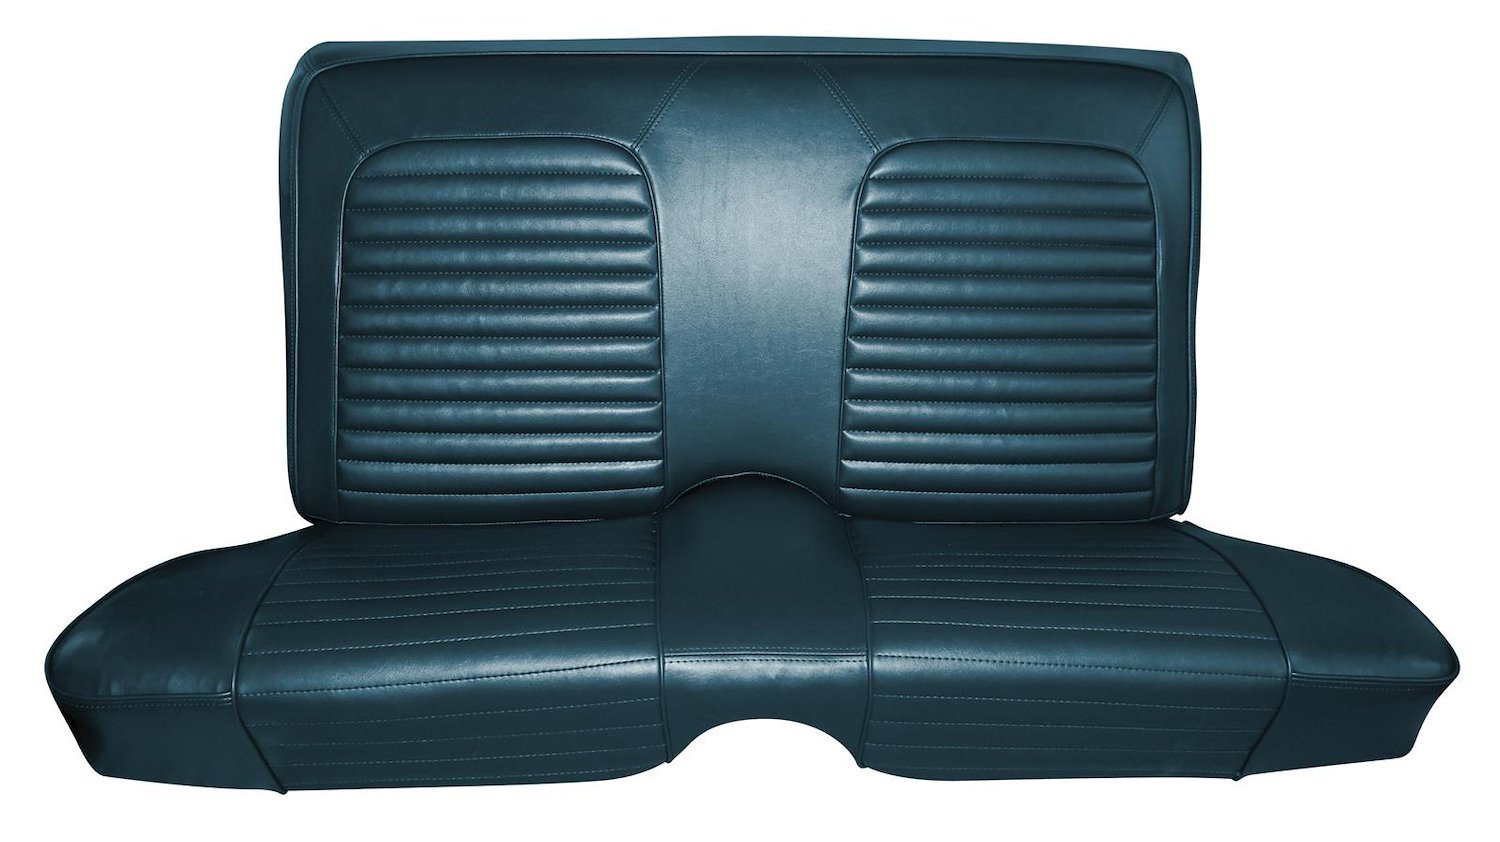 1969 Pontiac Firebird Custom-Deluxe Front Bench with Optional Fold-Down Rear Bench Upholstery Set